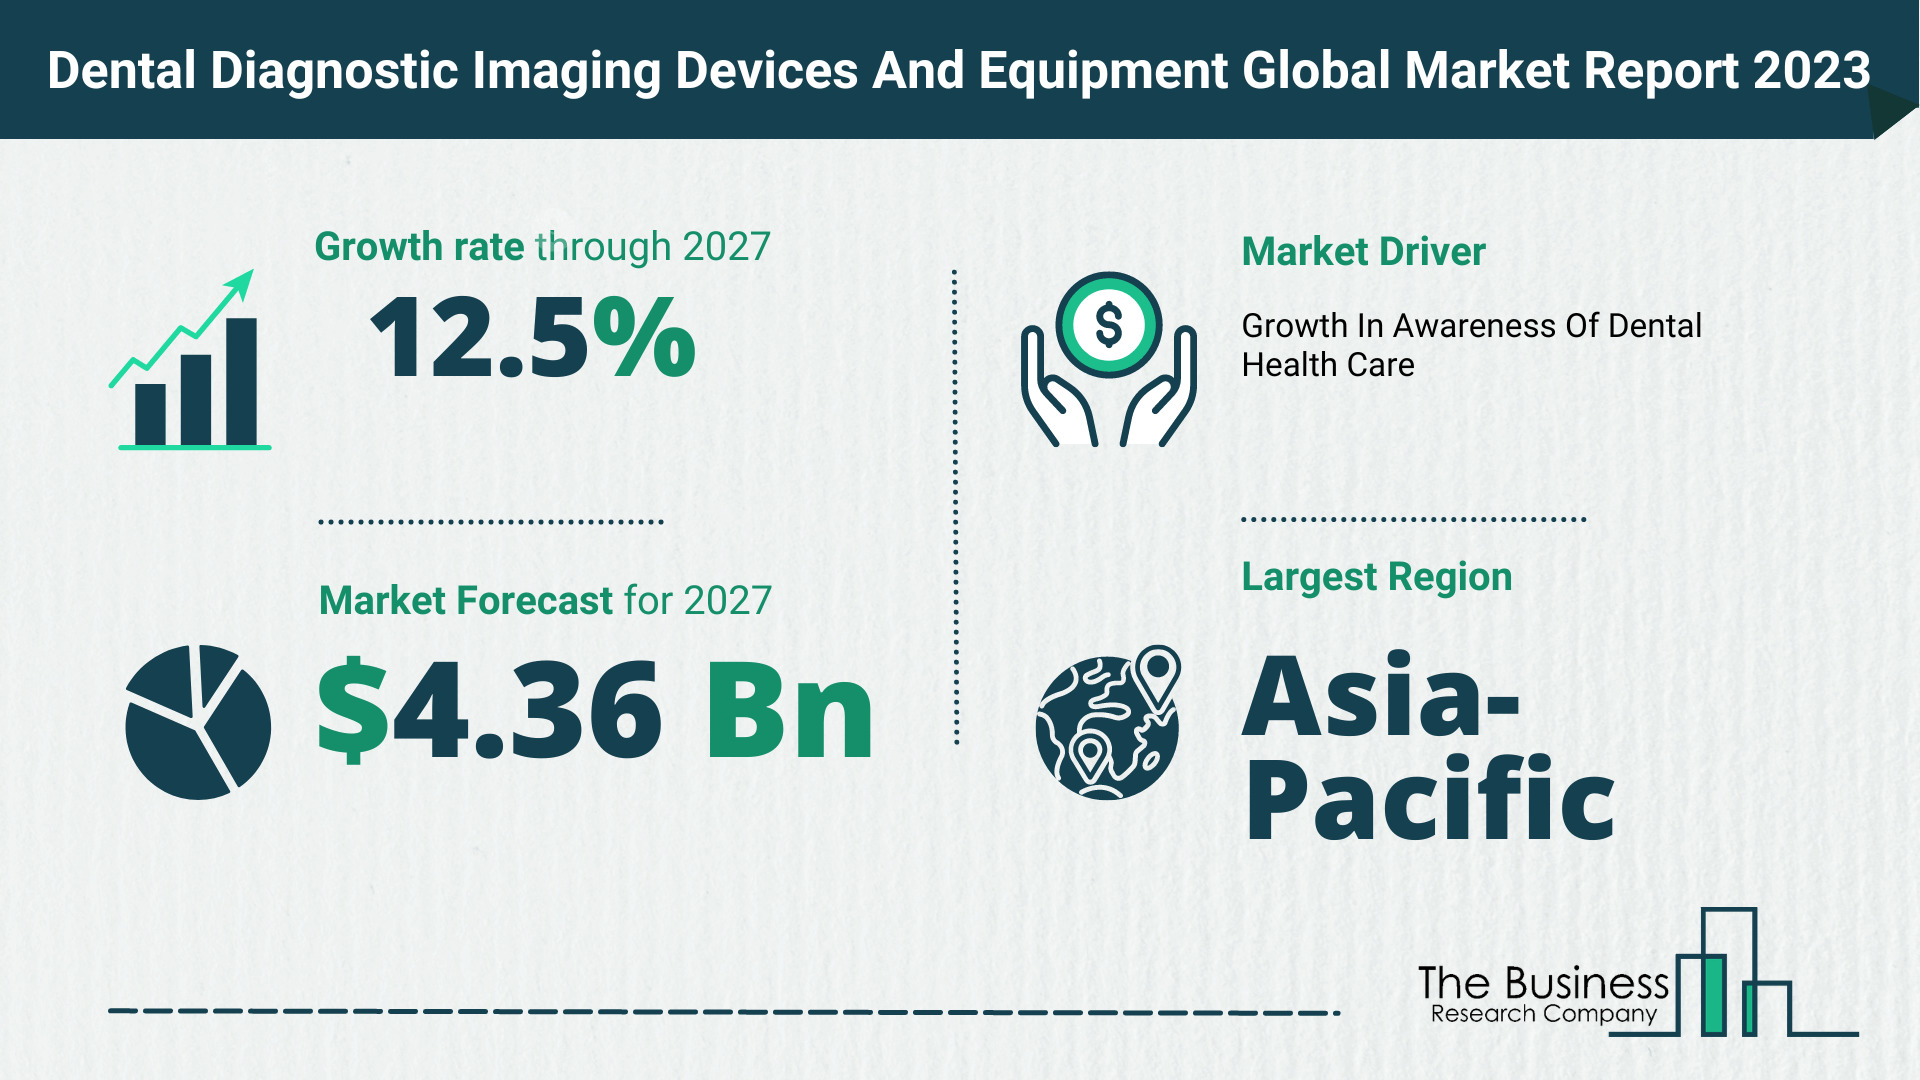 dental diagnostic imaging devices and equipment market overview, dental diagnostic imaging devices and equipment market share, dental diagnostic imaging devices and equipment market analysis, dental diagnostic imaging devices and equipment market forecast, global dental diagnostic imaging devices and equipment market, dental diagnostic imaging devices and equipment market trends, dental diagnostic imaging devices and equipment market size, dental diagnostic imaging devices and equipment industry, dental diagnostic imaging devices and equipment market segments, dental diagnostic imaging devices and equipment market growth, dental diagnostic imaging devices and equipment market research, dental diagnostic imaging devices and equipment market report